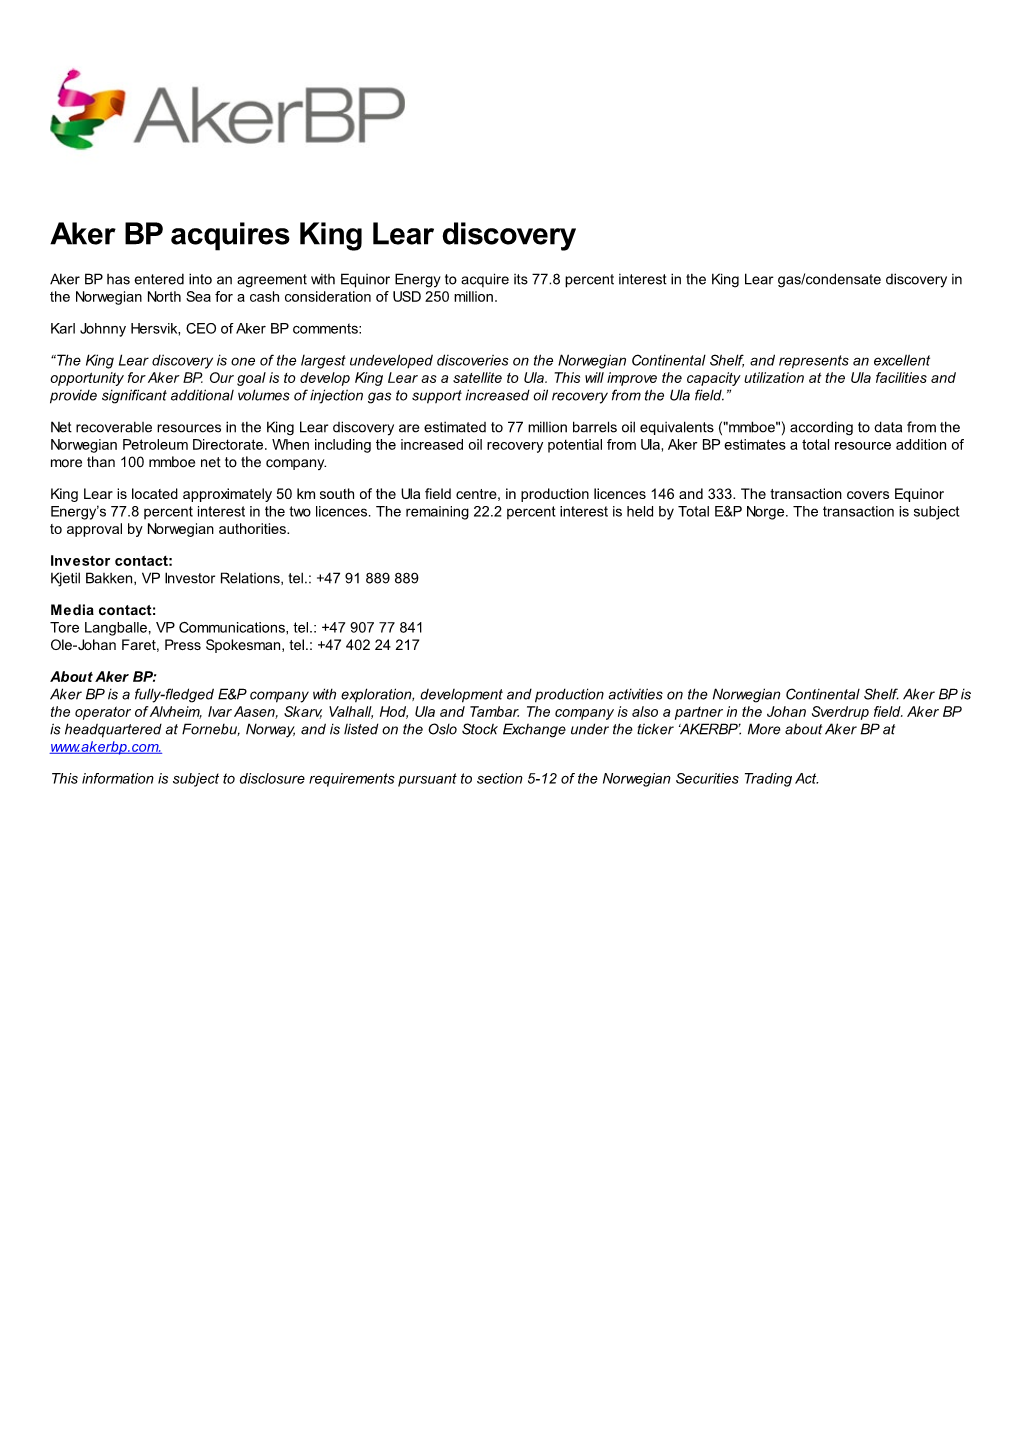 Aker BP Acquires King Lear Discovery